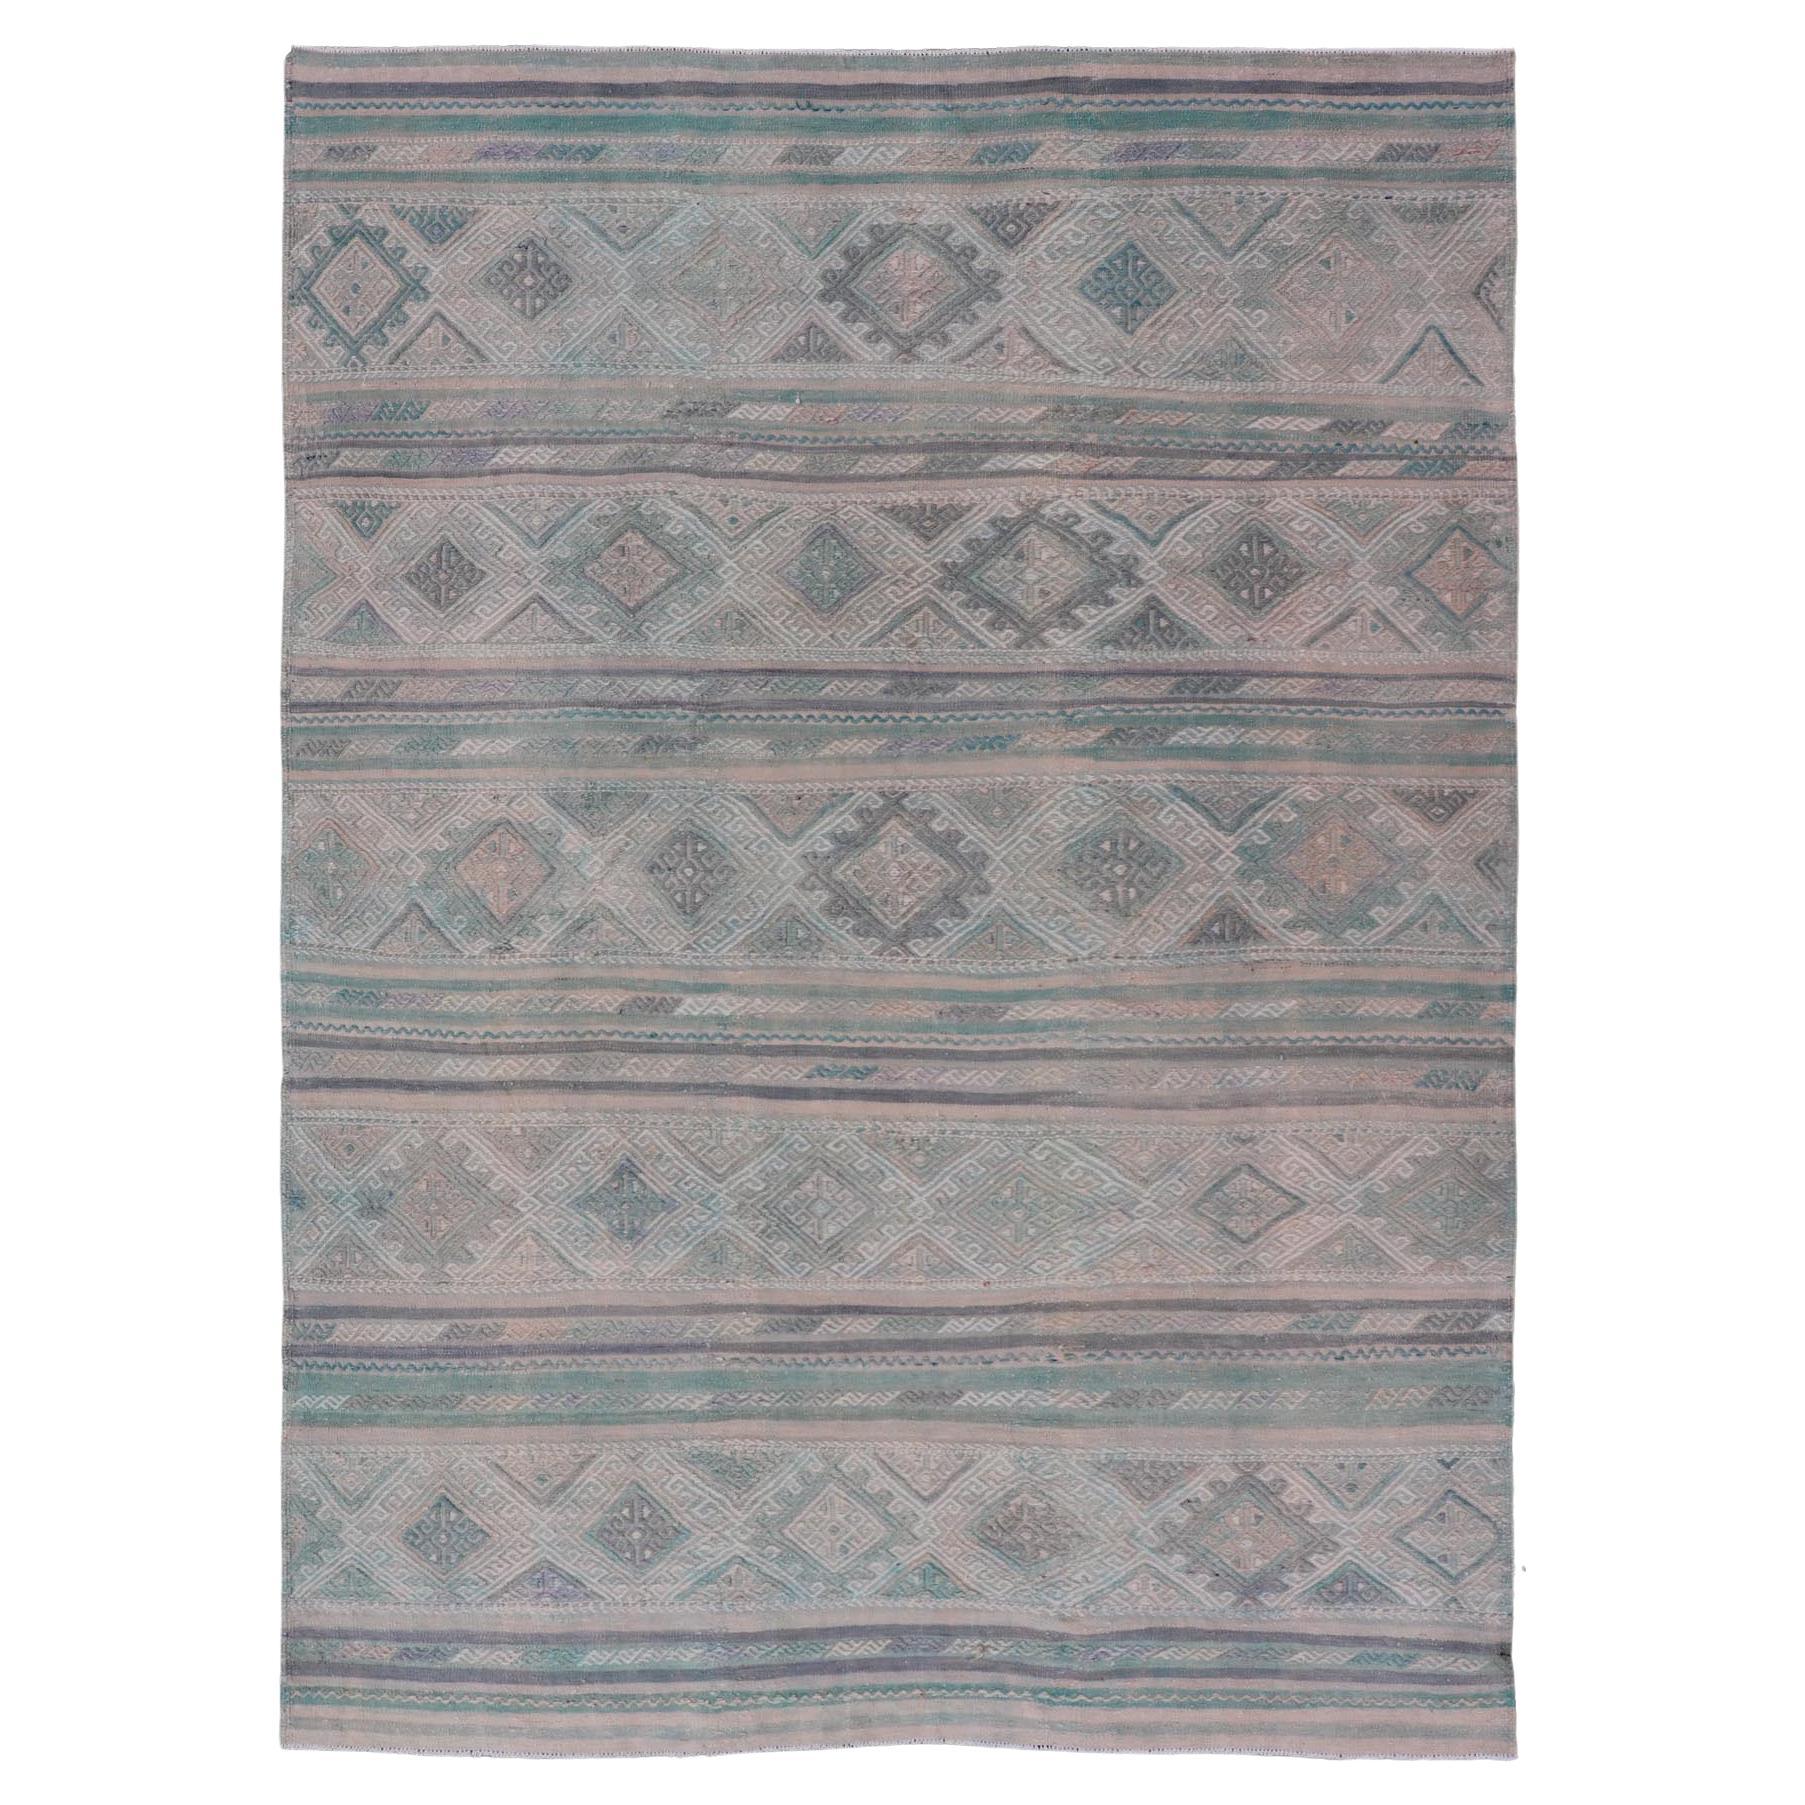 Turkish Vintage Kilim Flat-Weave with Embroideries Kilim in Pastel Color For Sale